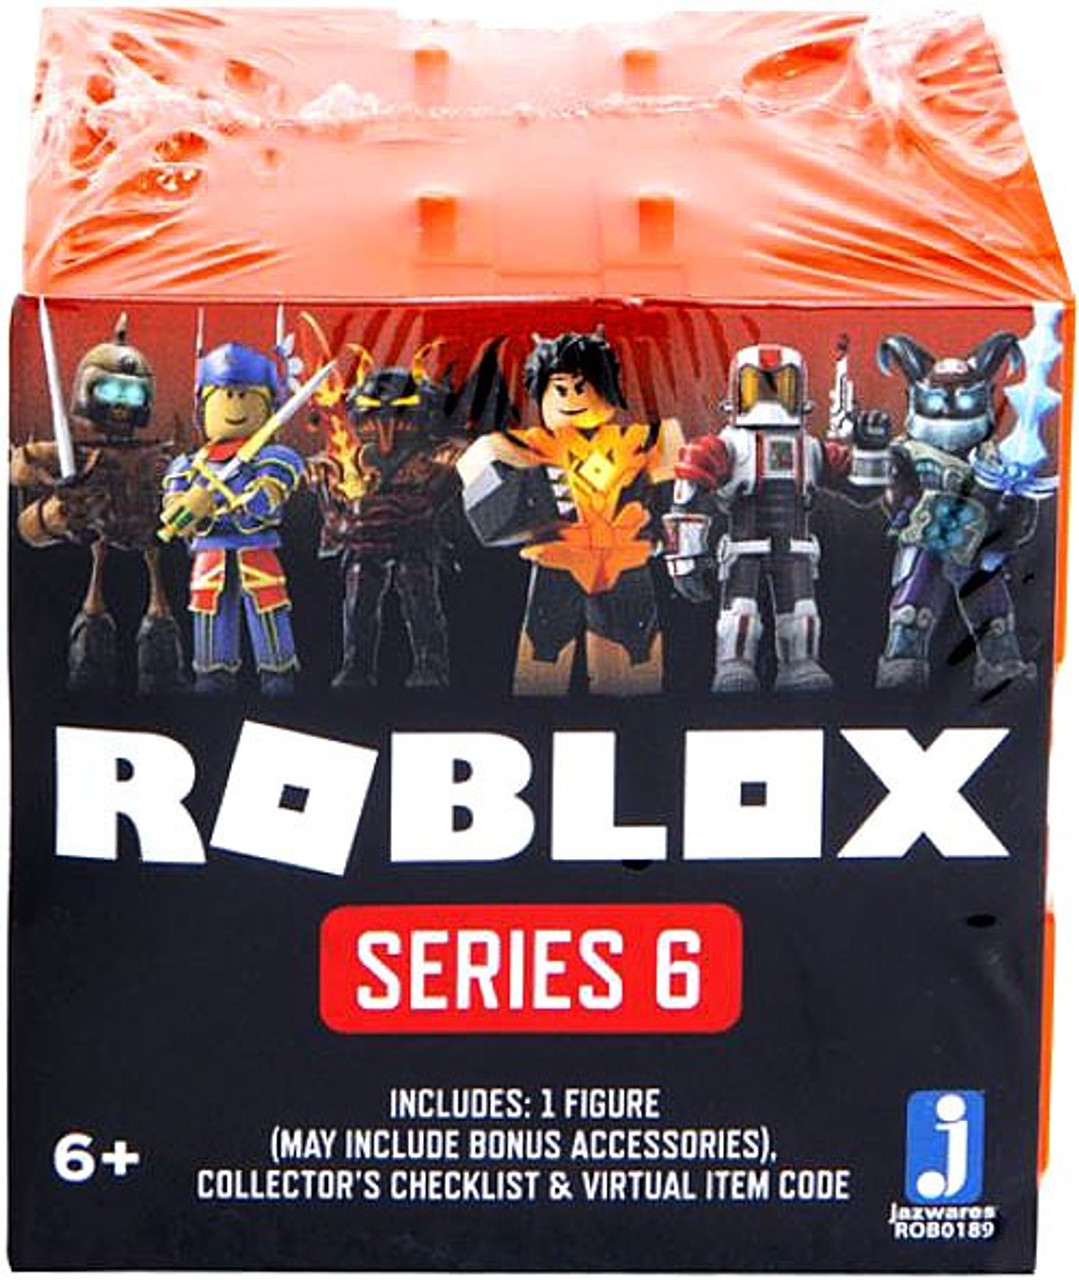 Roblox Series 5 Yellow Gold Blind Box Toys Figures 1 2 3 4 Exclusive Game Codes Tv Movie Video Games Toys Hobbies Plazastore Se - roblox mystery box series 5